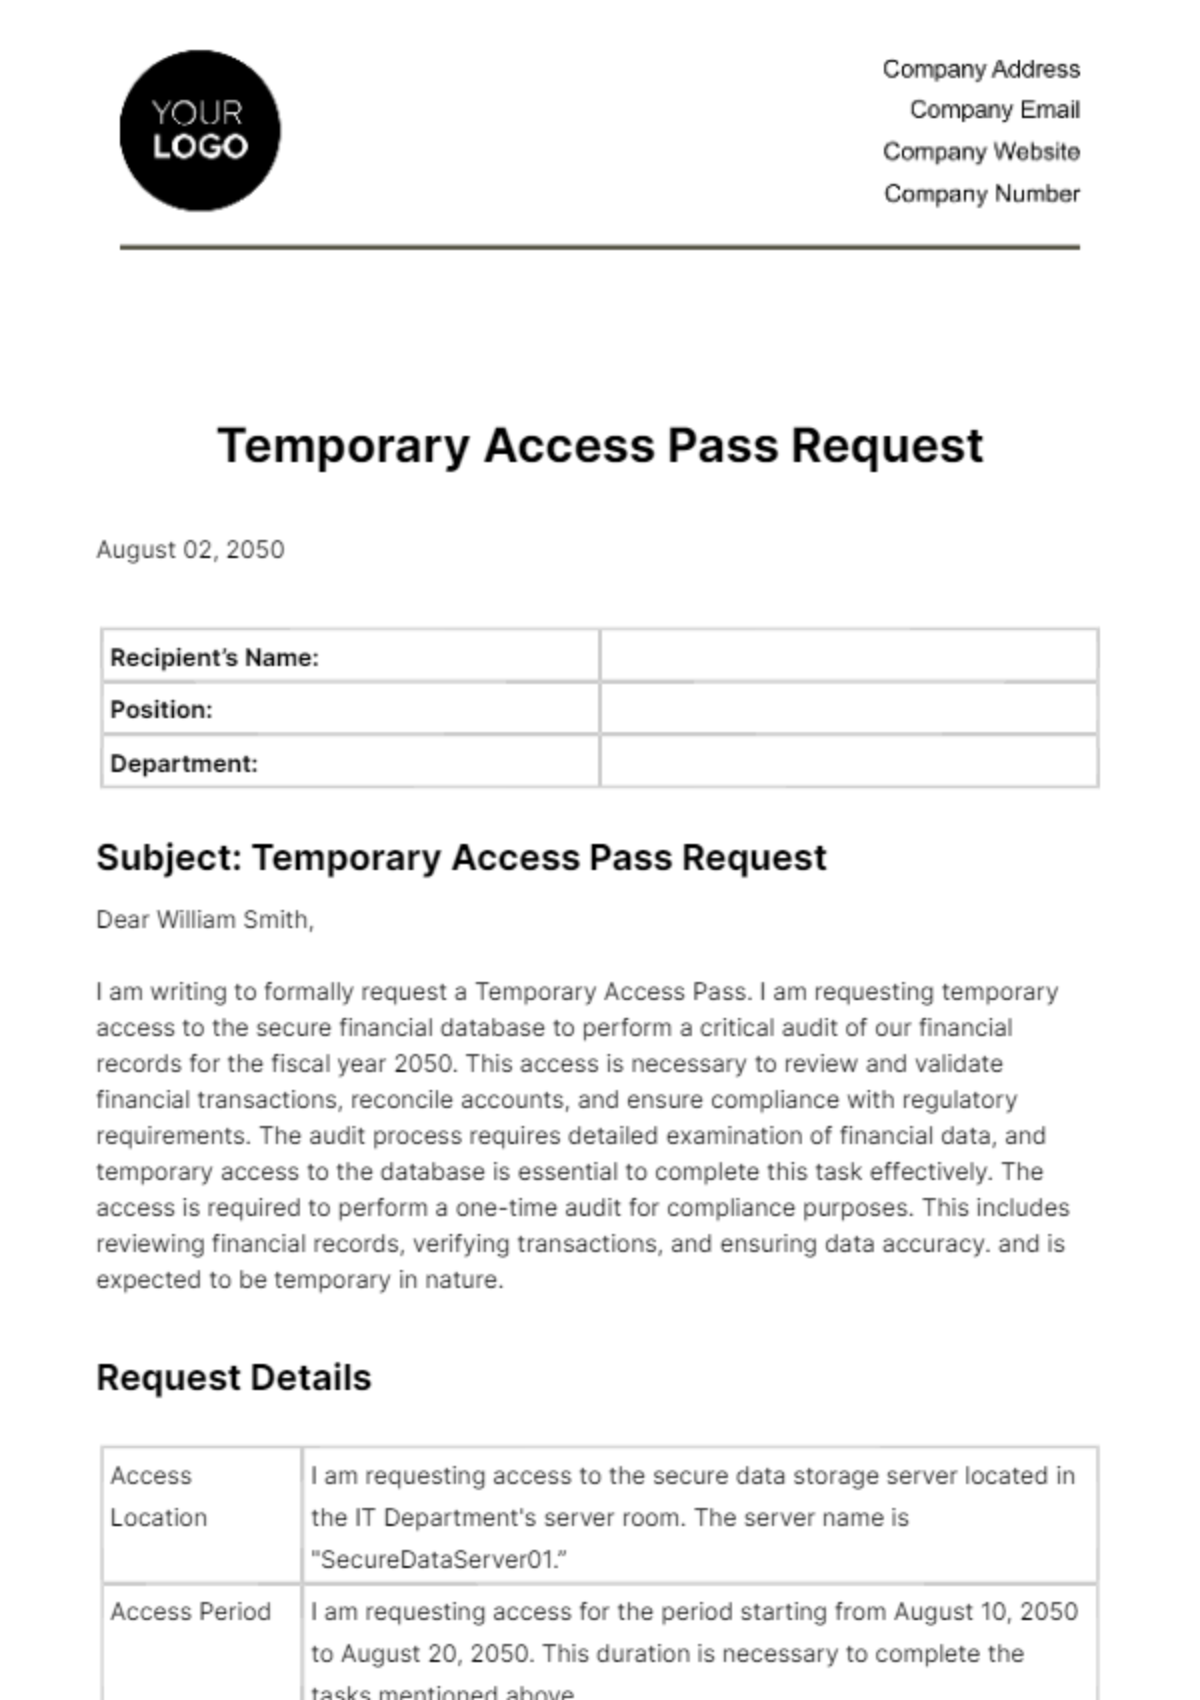 Free Temporary Access Pass Request HR Template